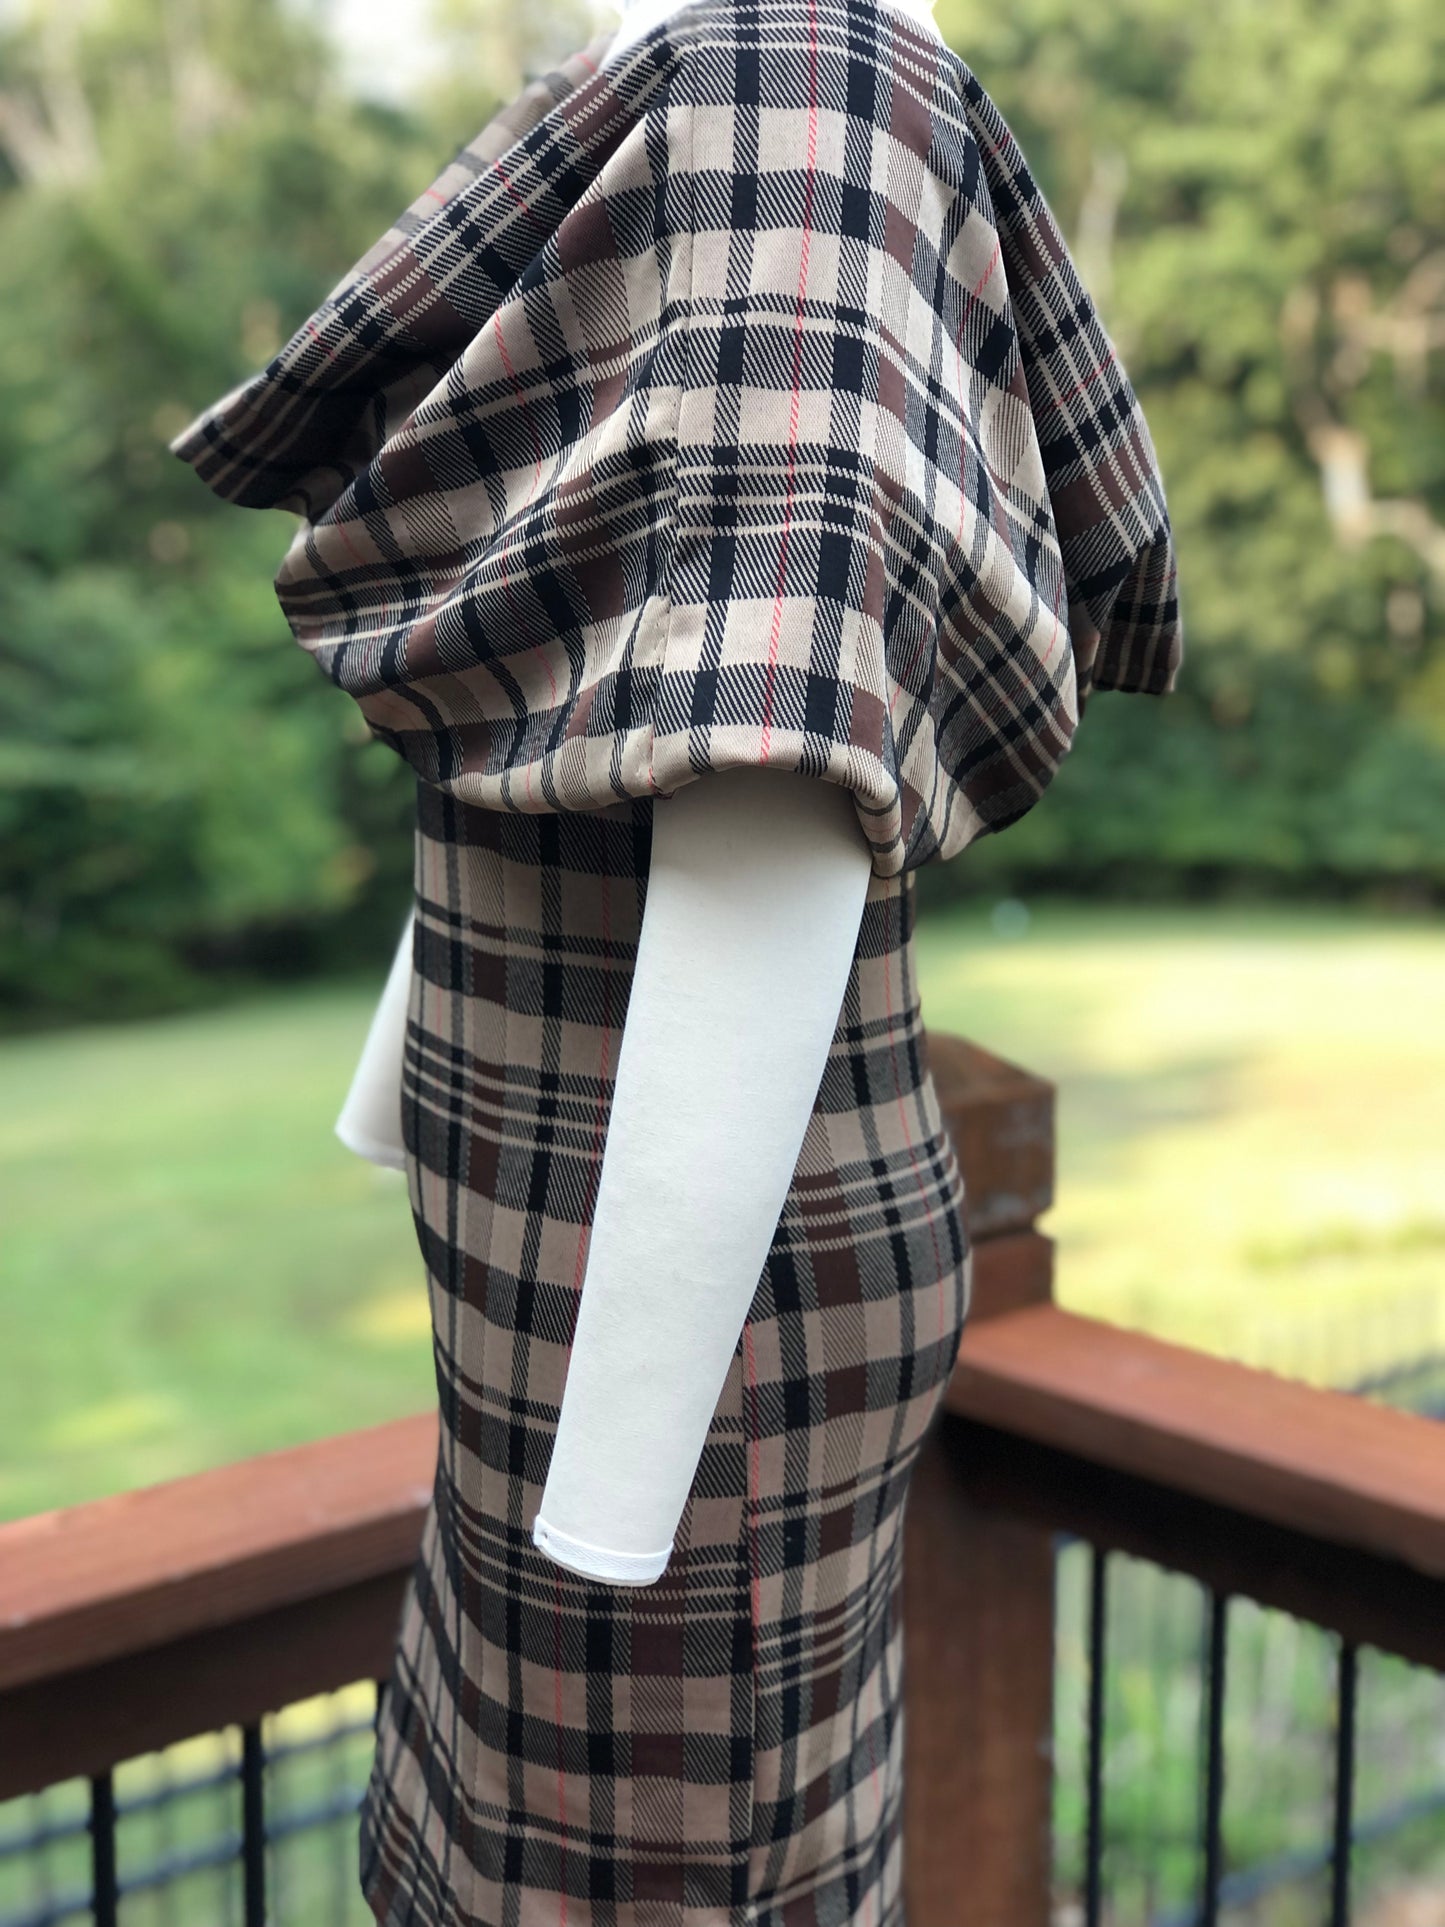 Beige, Brown and Black Plaid Dress - Size 8/10 - Only ONE Available